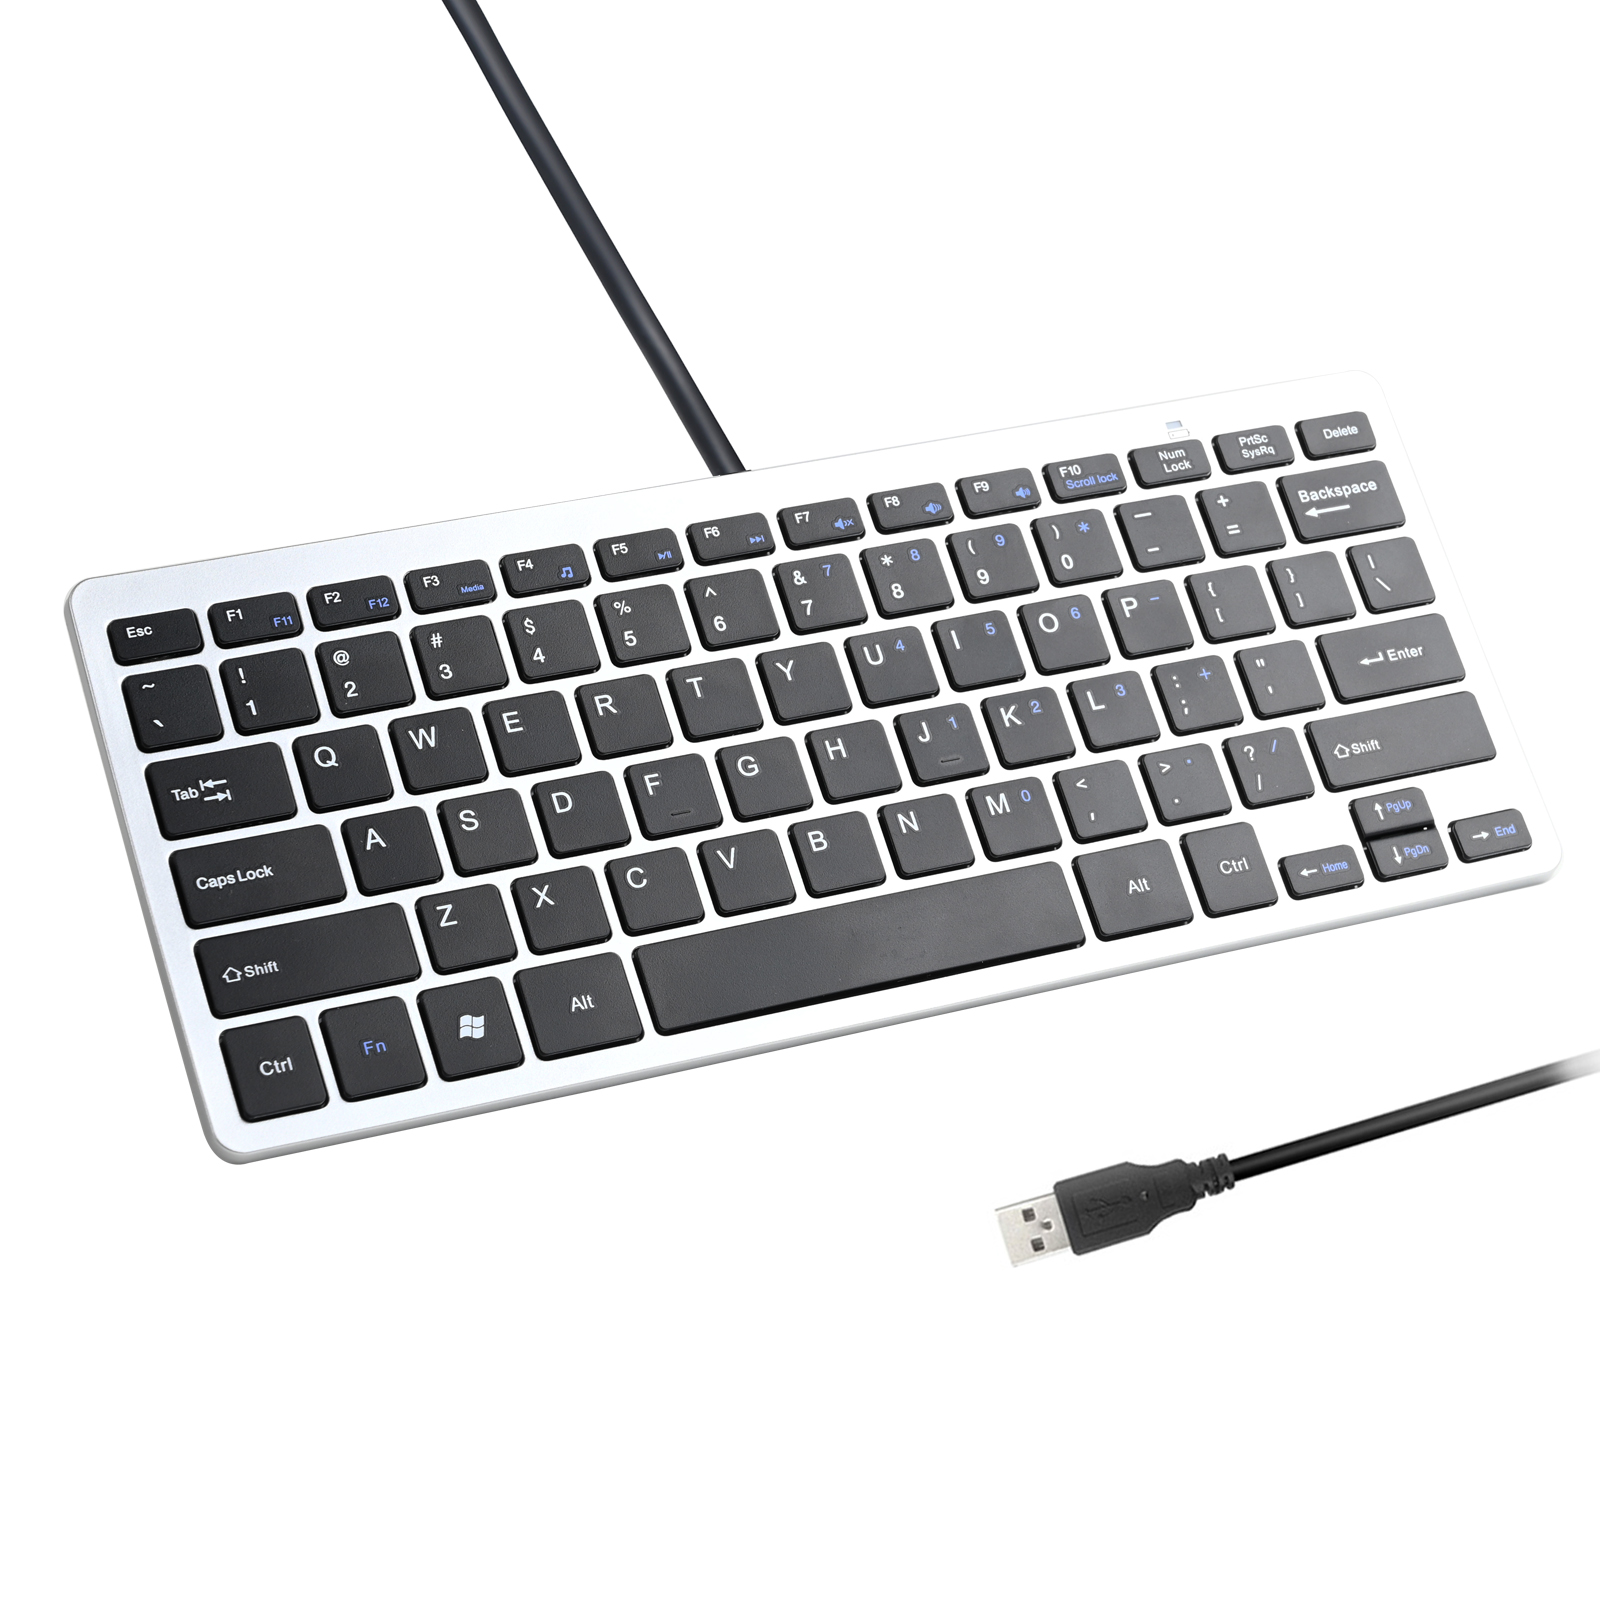 iKKEGOL Compact USB Wired X-Structure Chocolate Keyboard